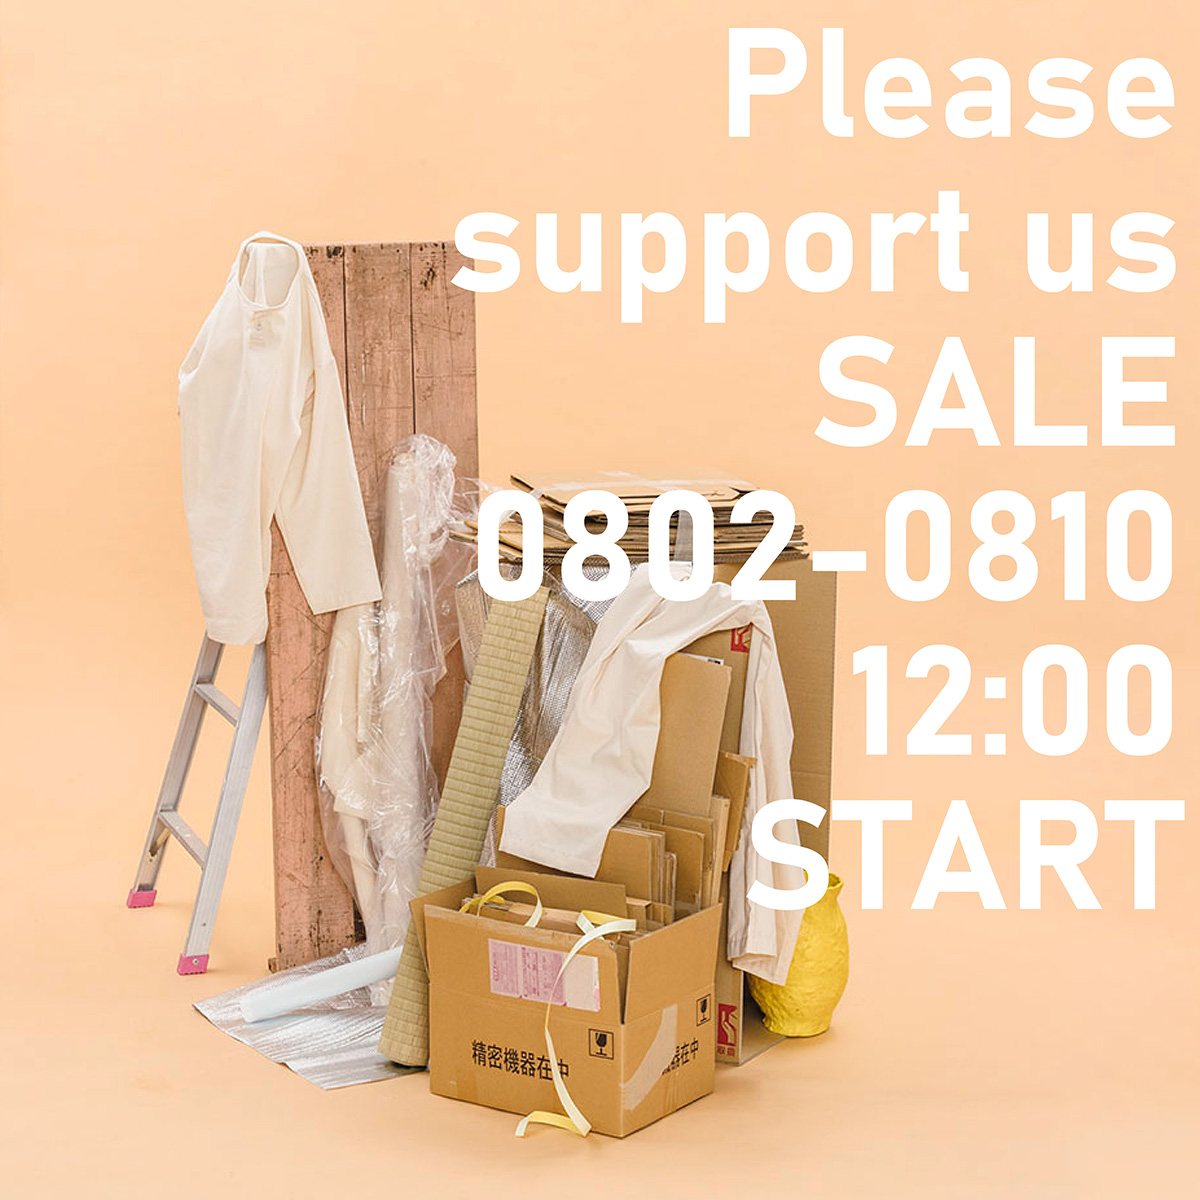 Please support us SALE